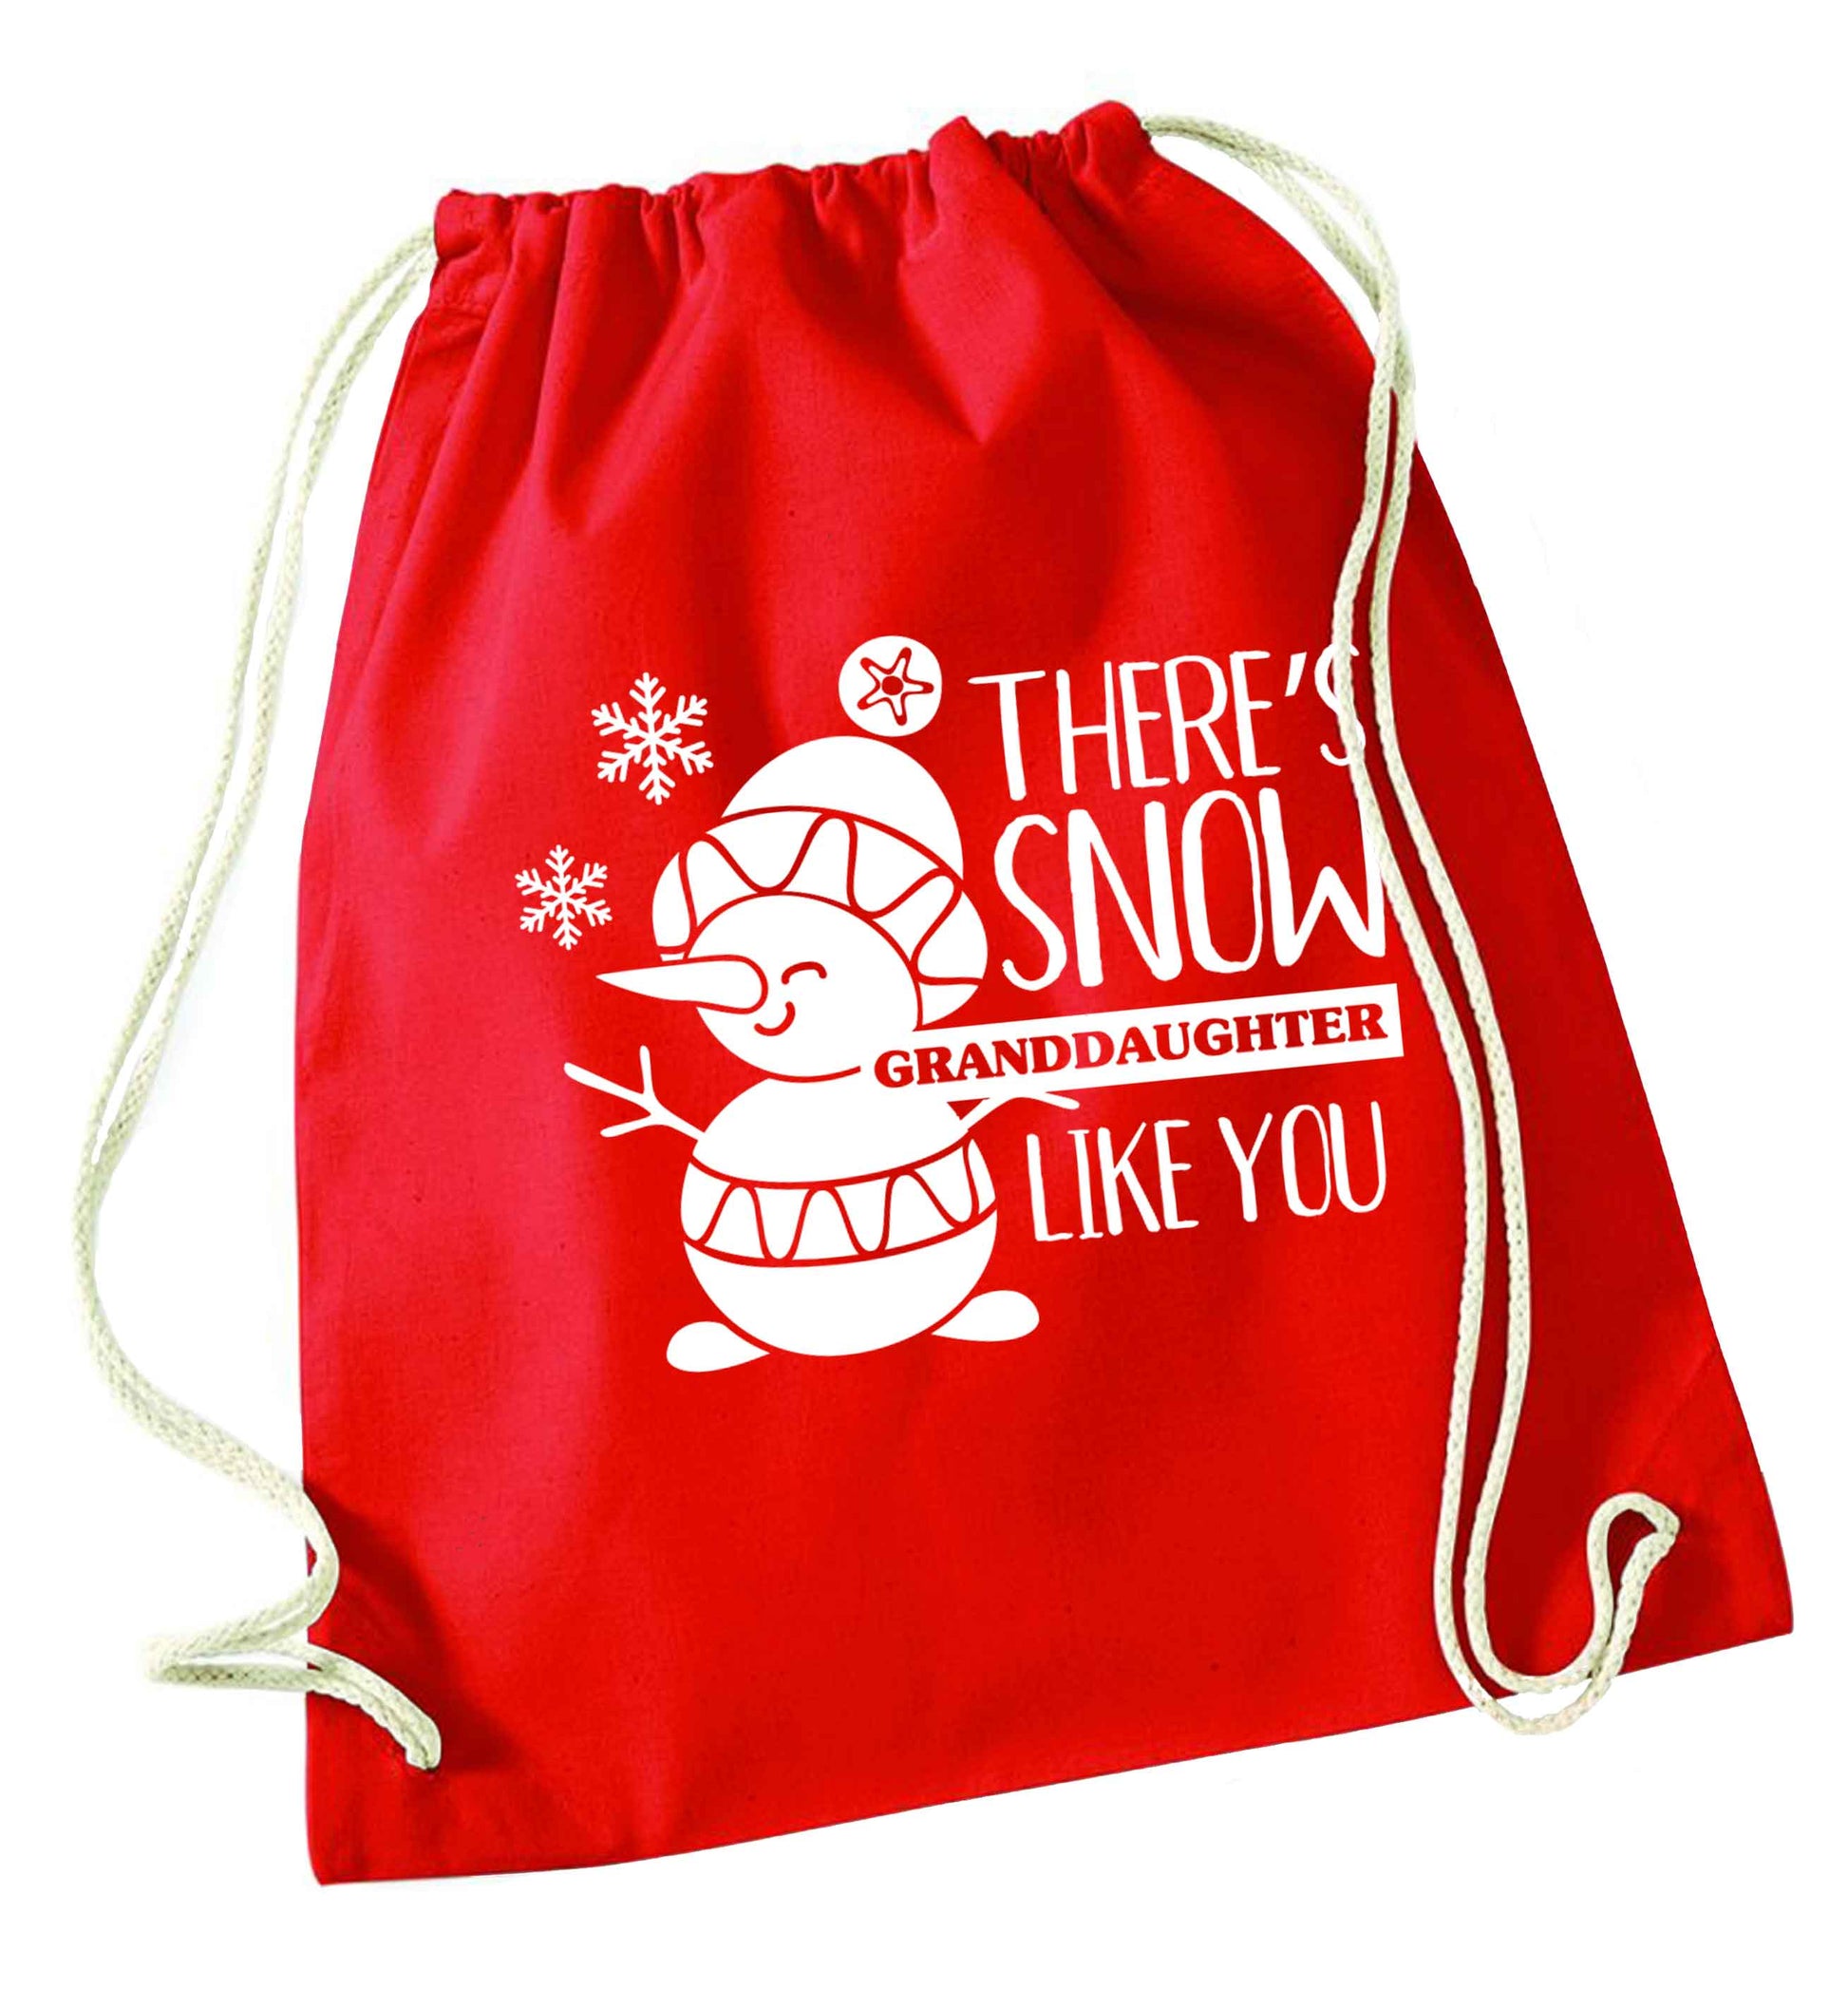 There's snow granddaughter like you red drawstring bag 